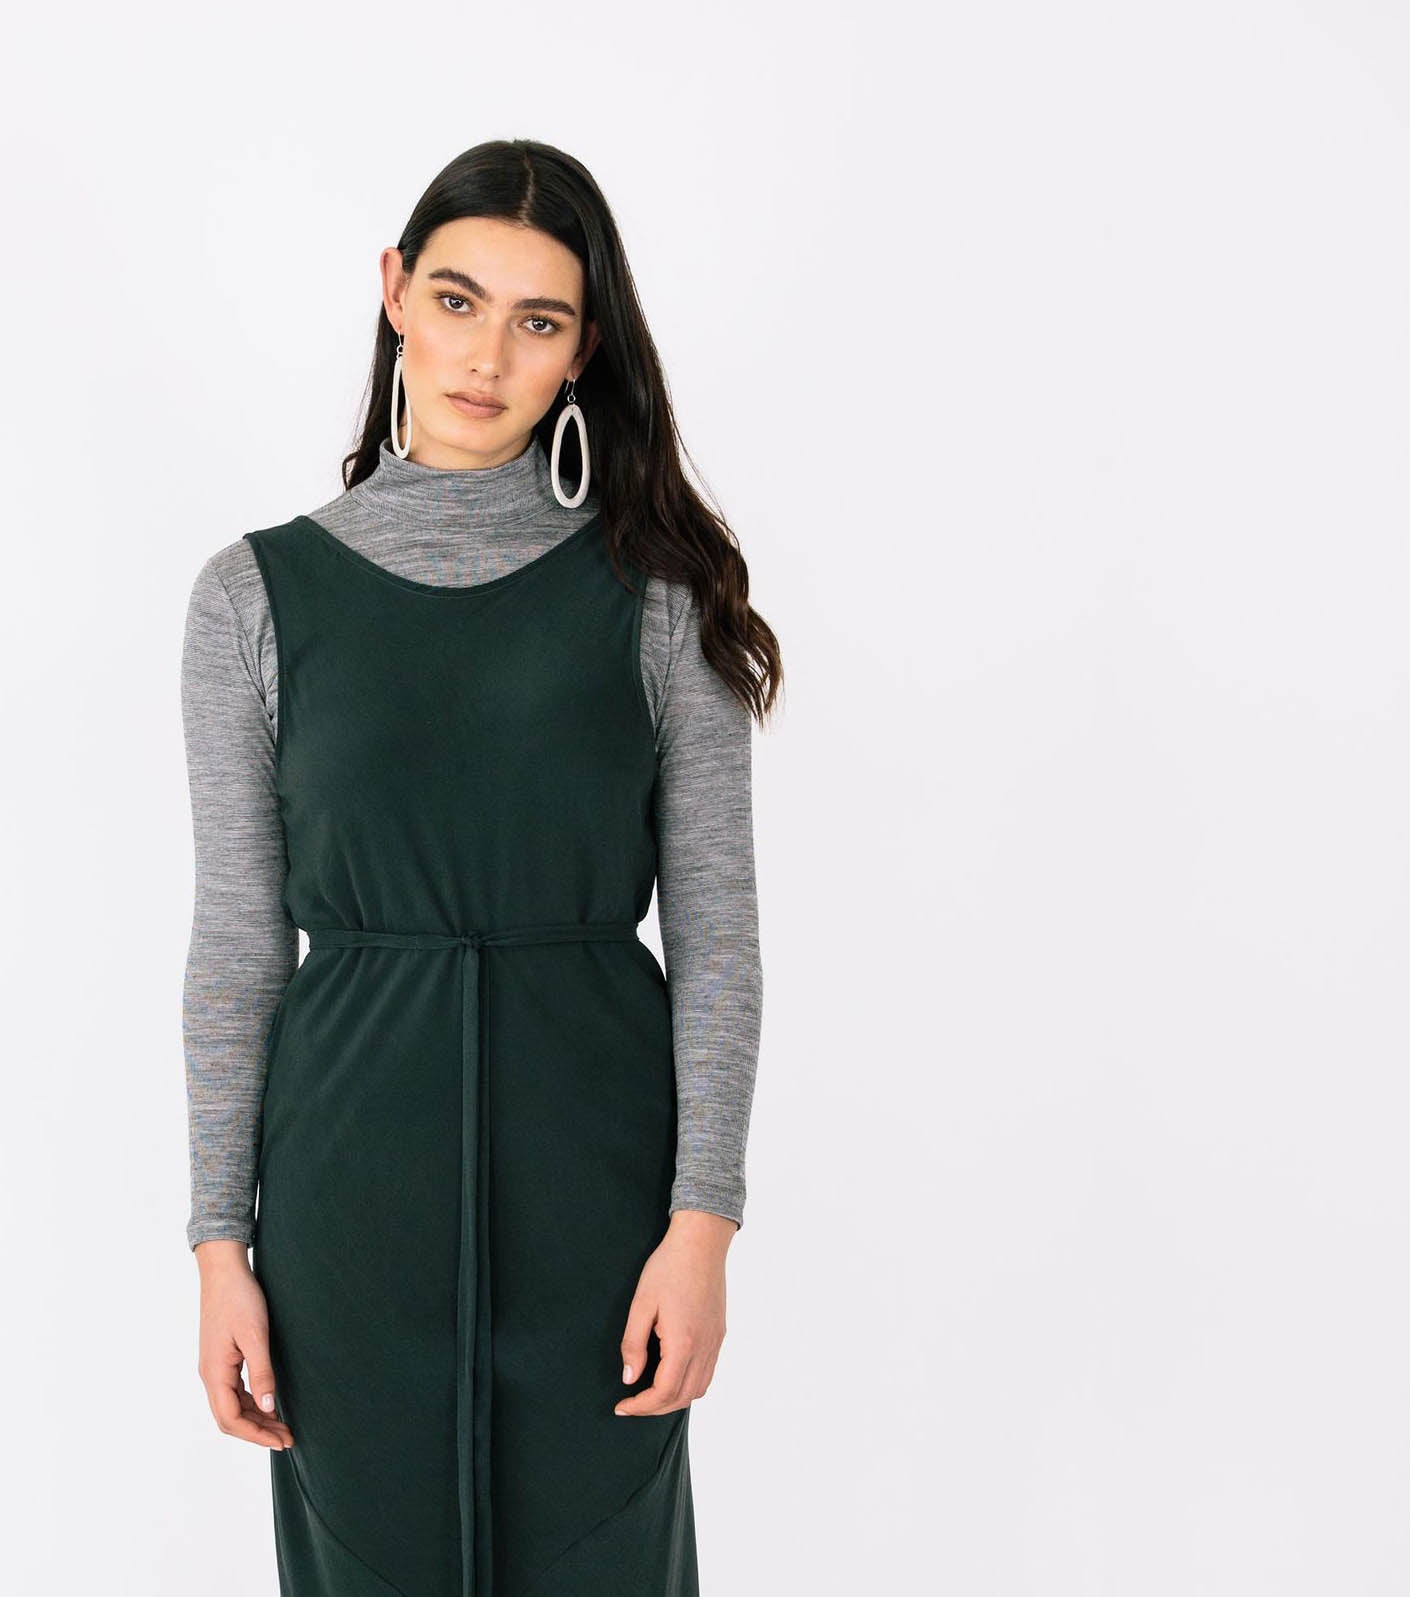 a picture of a white woman with long dark hair wearing a dark green dress layered over the top of a grey turtleneck